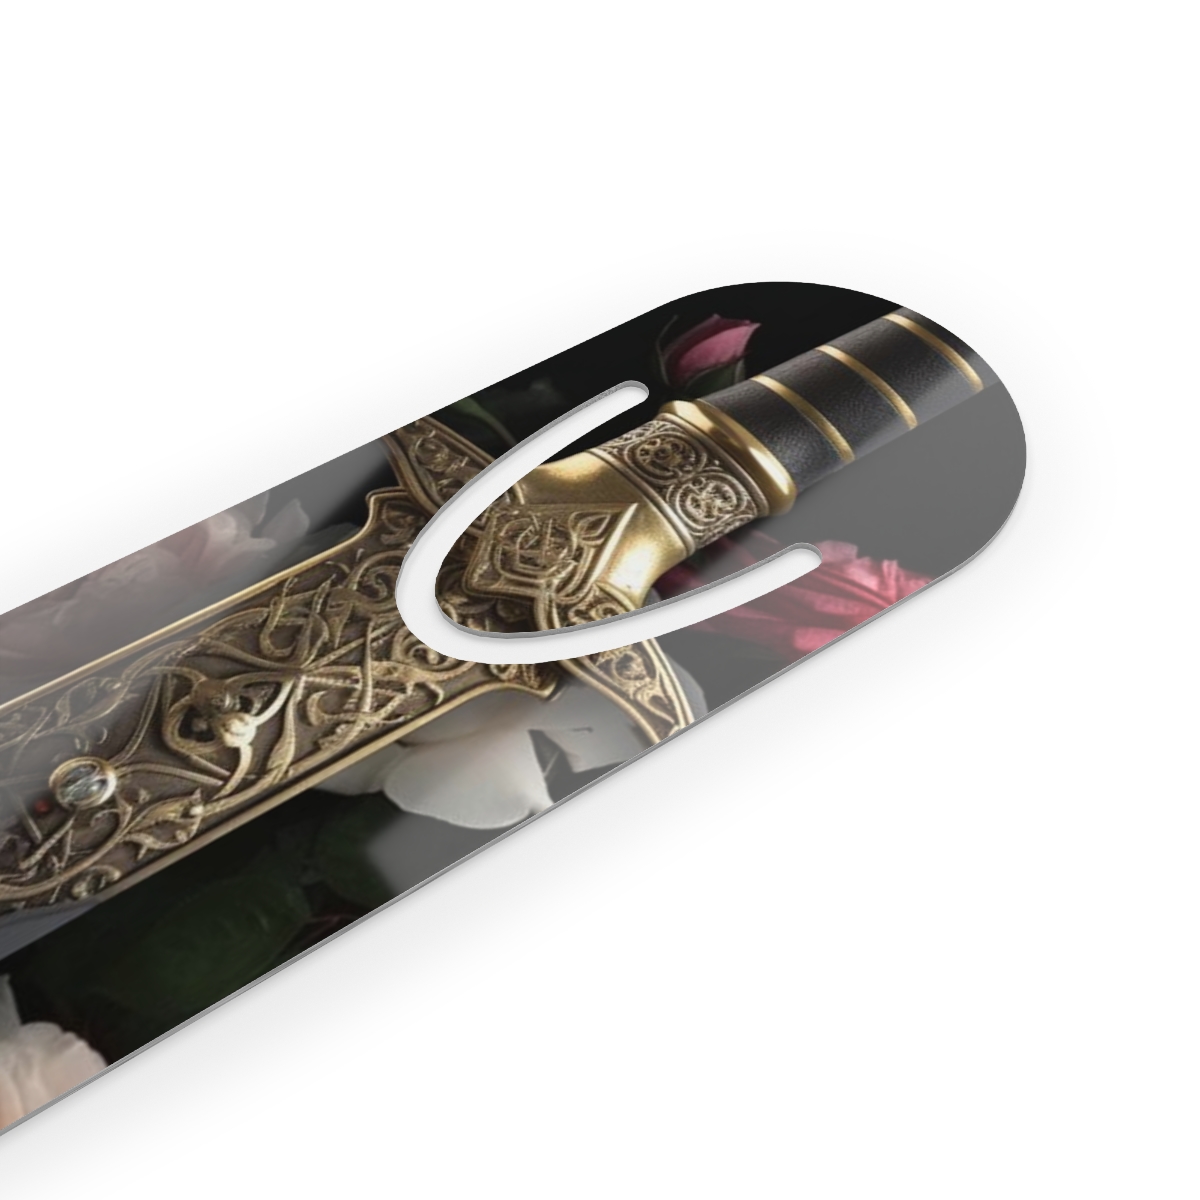 The Gold-Hilted Sword Bookmark product thumbnail image